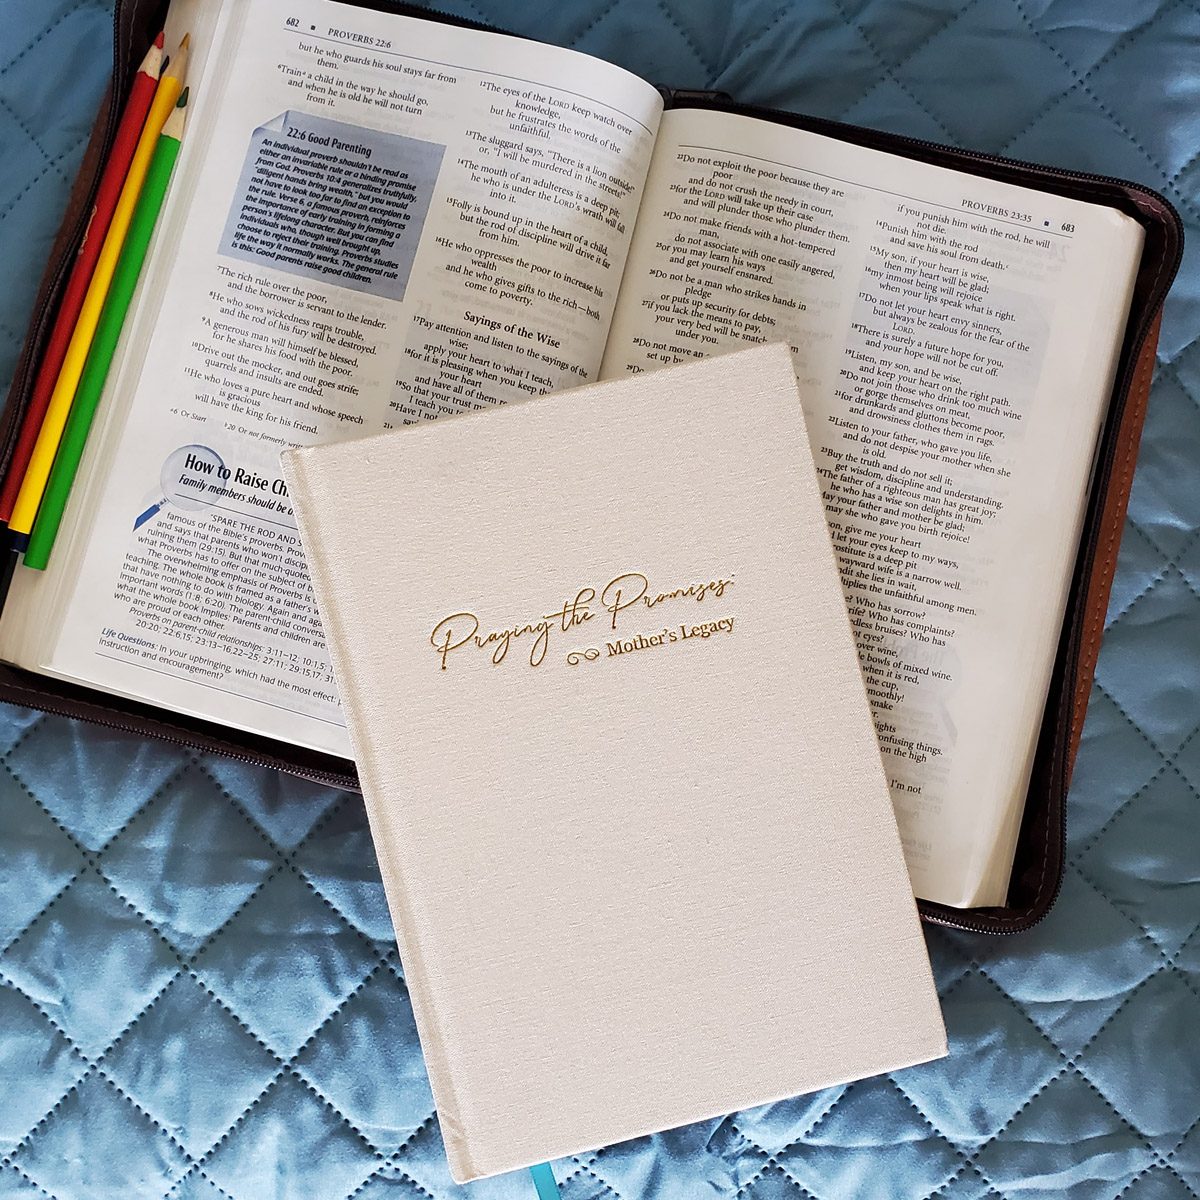 Praying God's word over your children is easy with our NEW Praying the Promises Mother's Legacy prayer journal. Hop over to learn more...